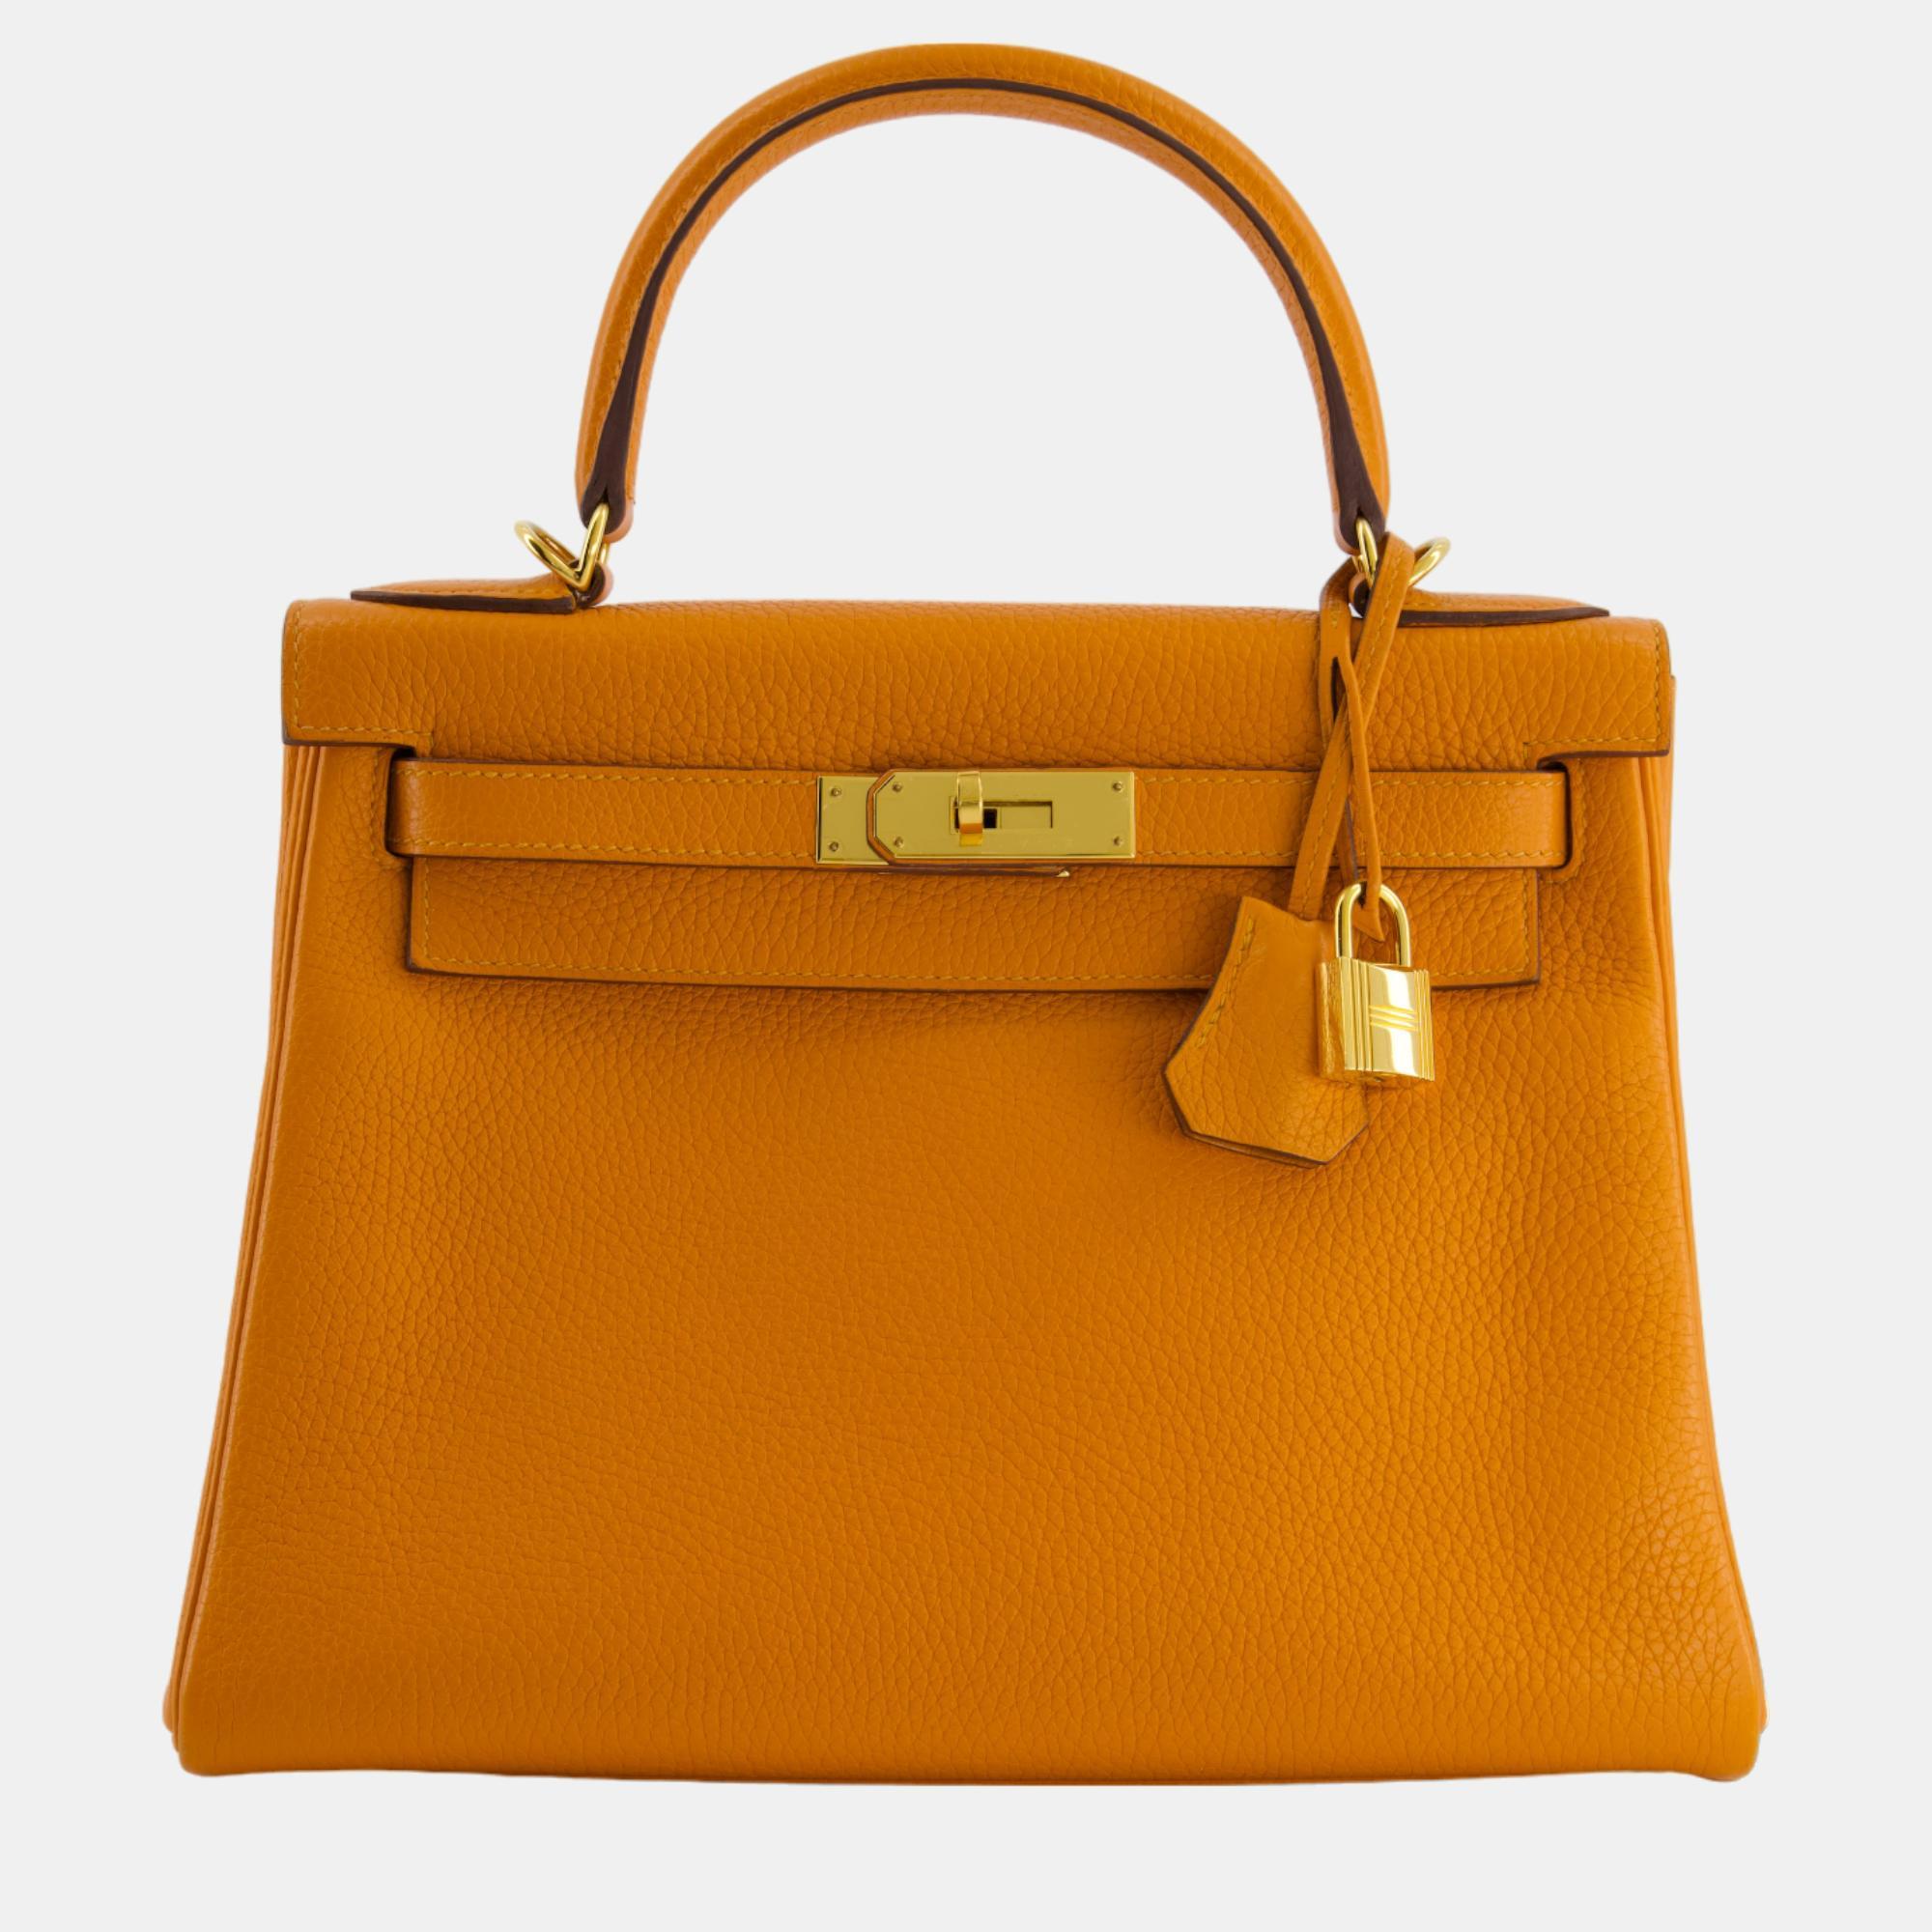 Hermes Kelly Bag 28cm In Abricot Clemence Leather With Gold Hardware